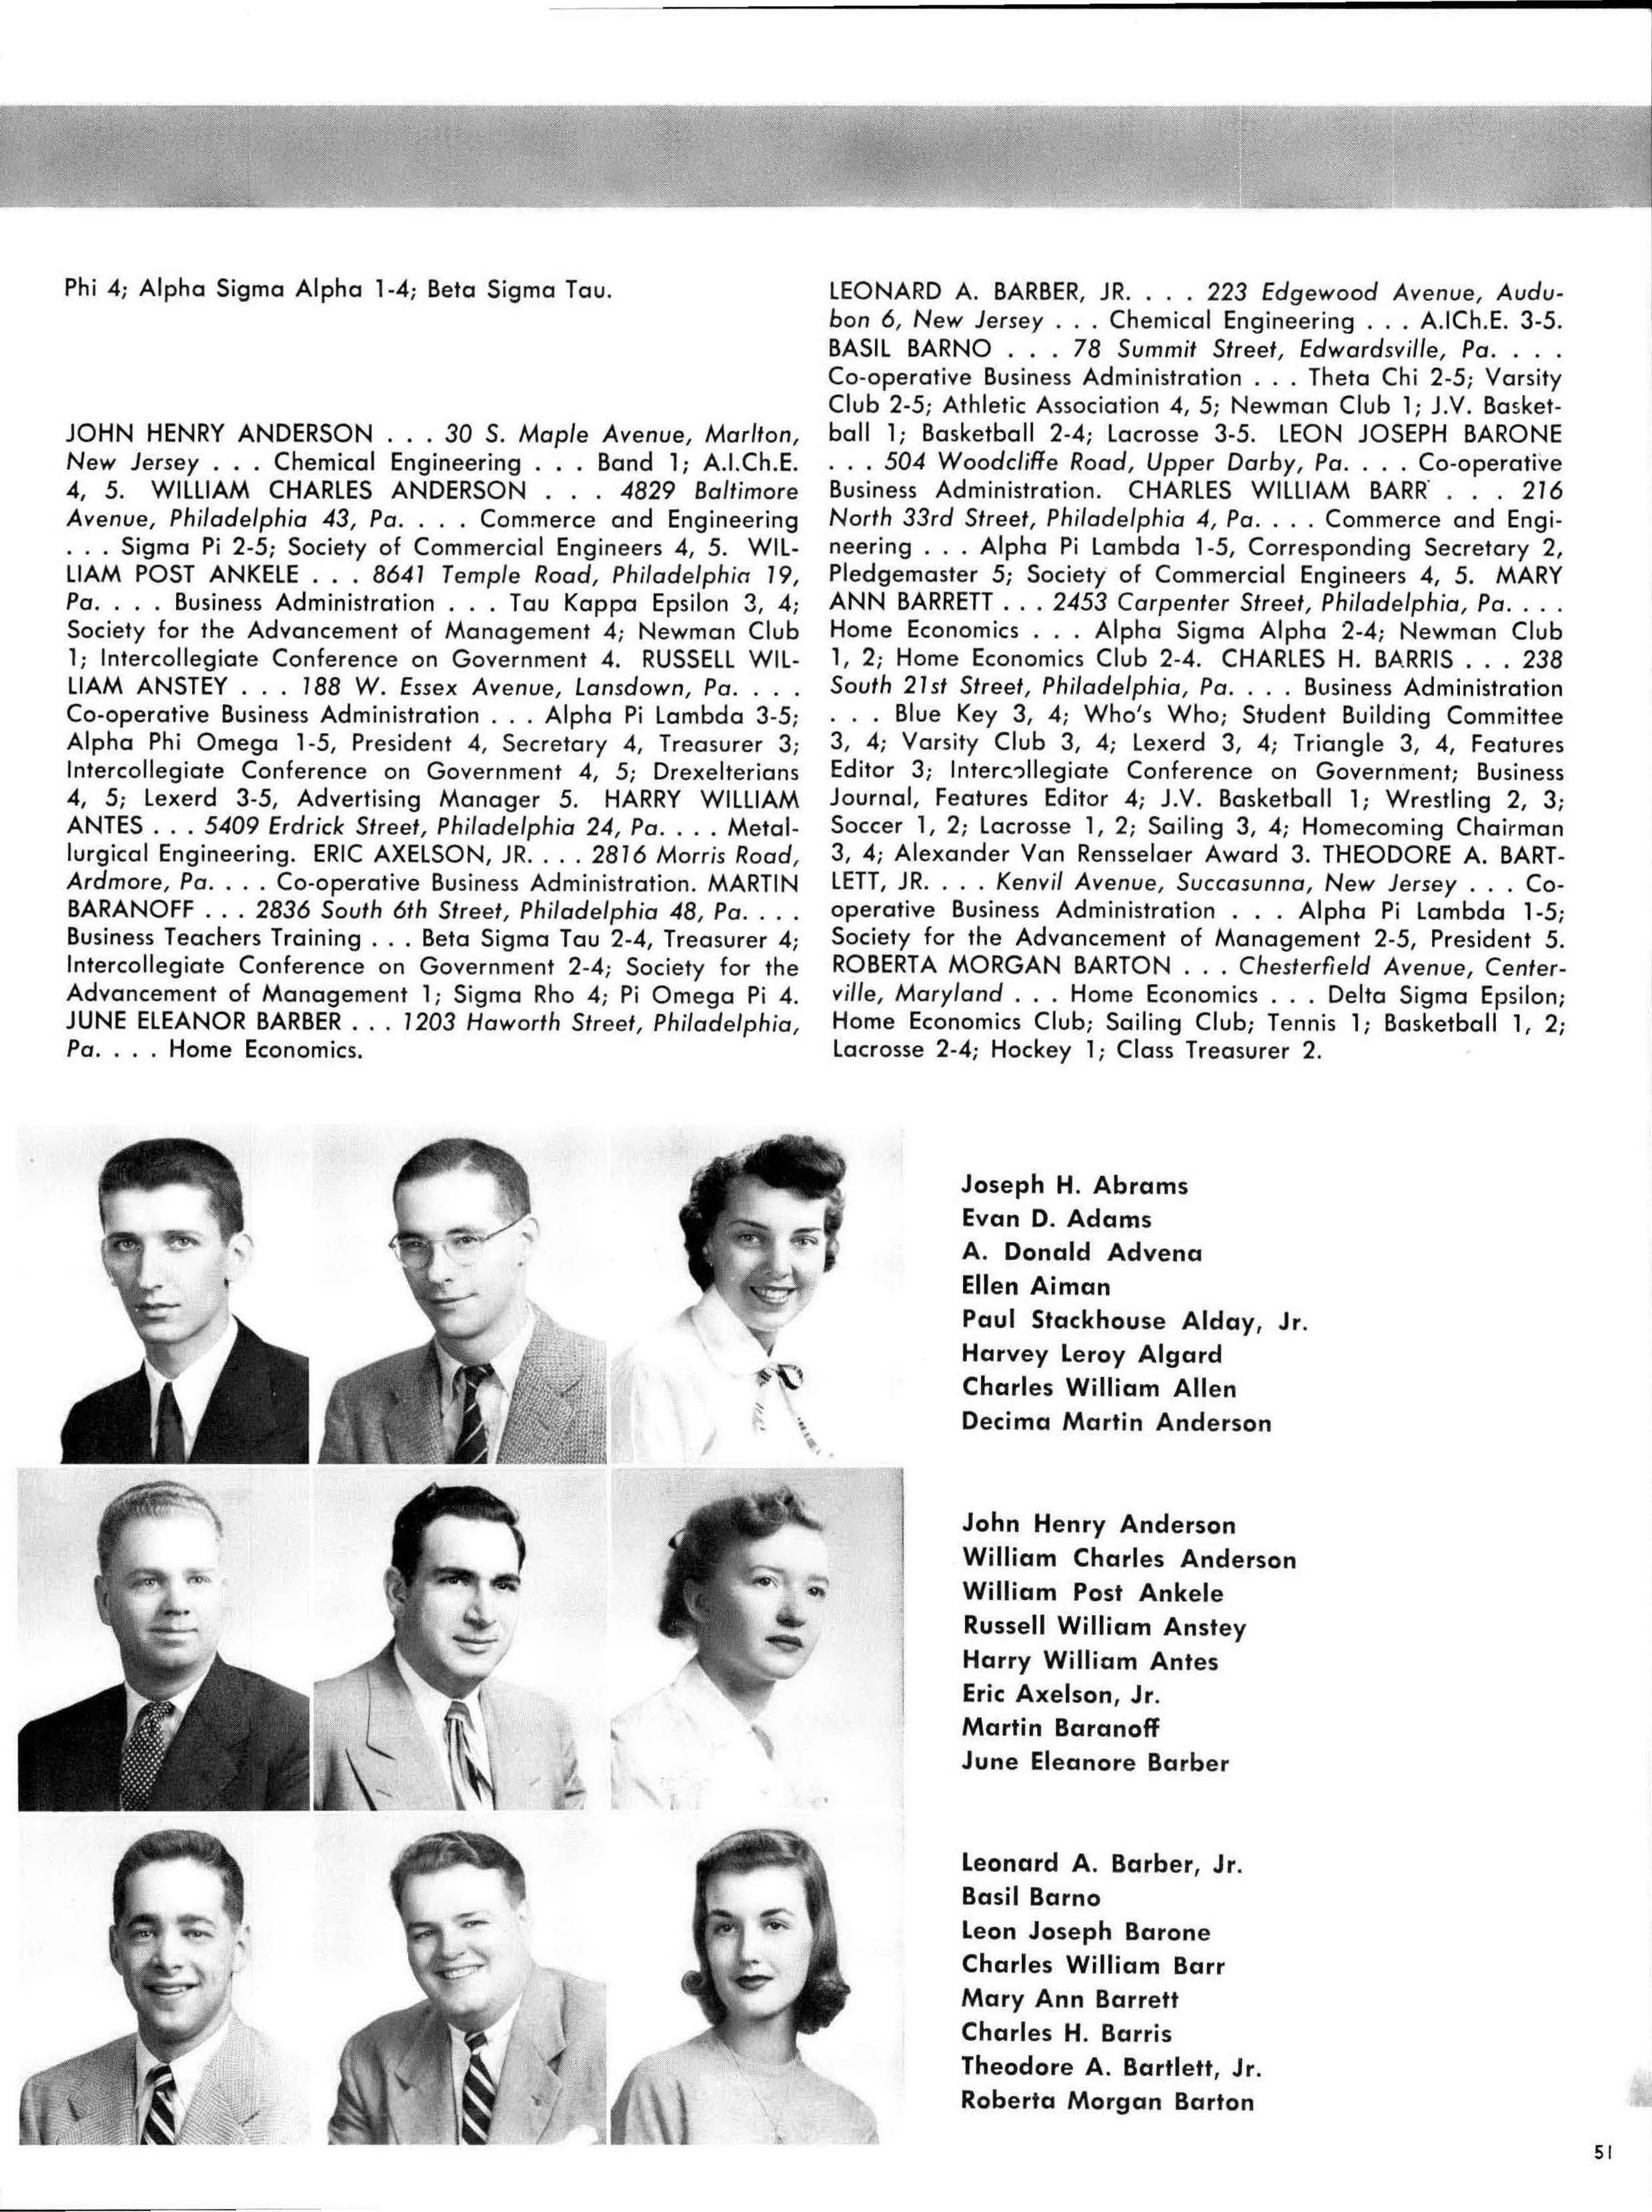 The 1953 Lexerd yearbook page featuring Chuck Barris. Photo courtesy University Archives.